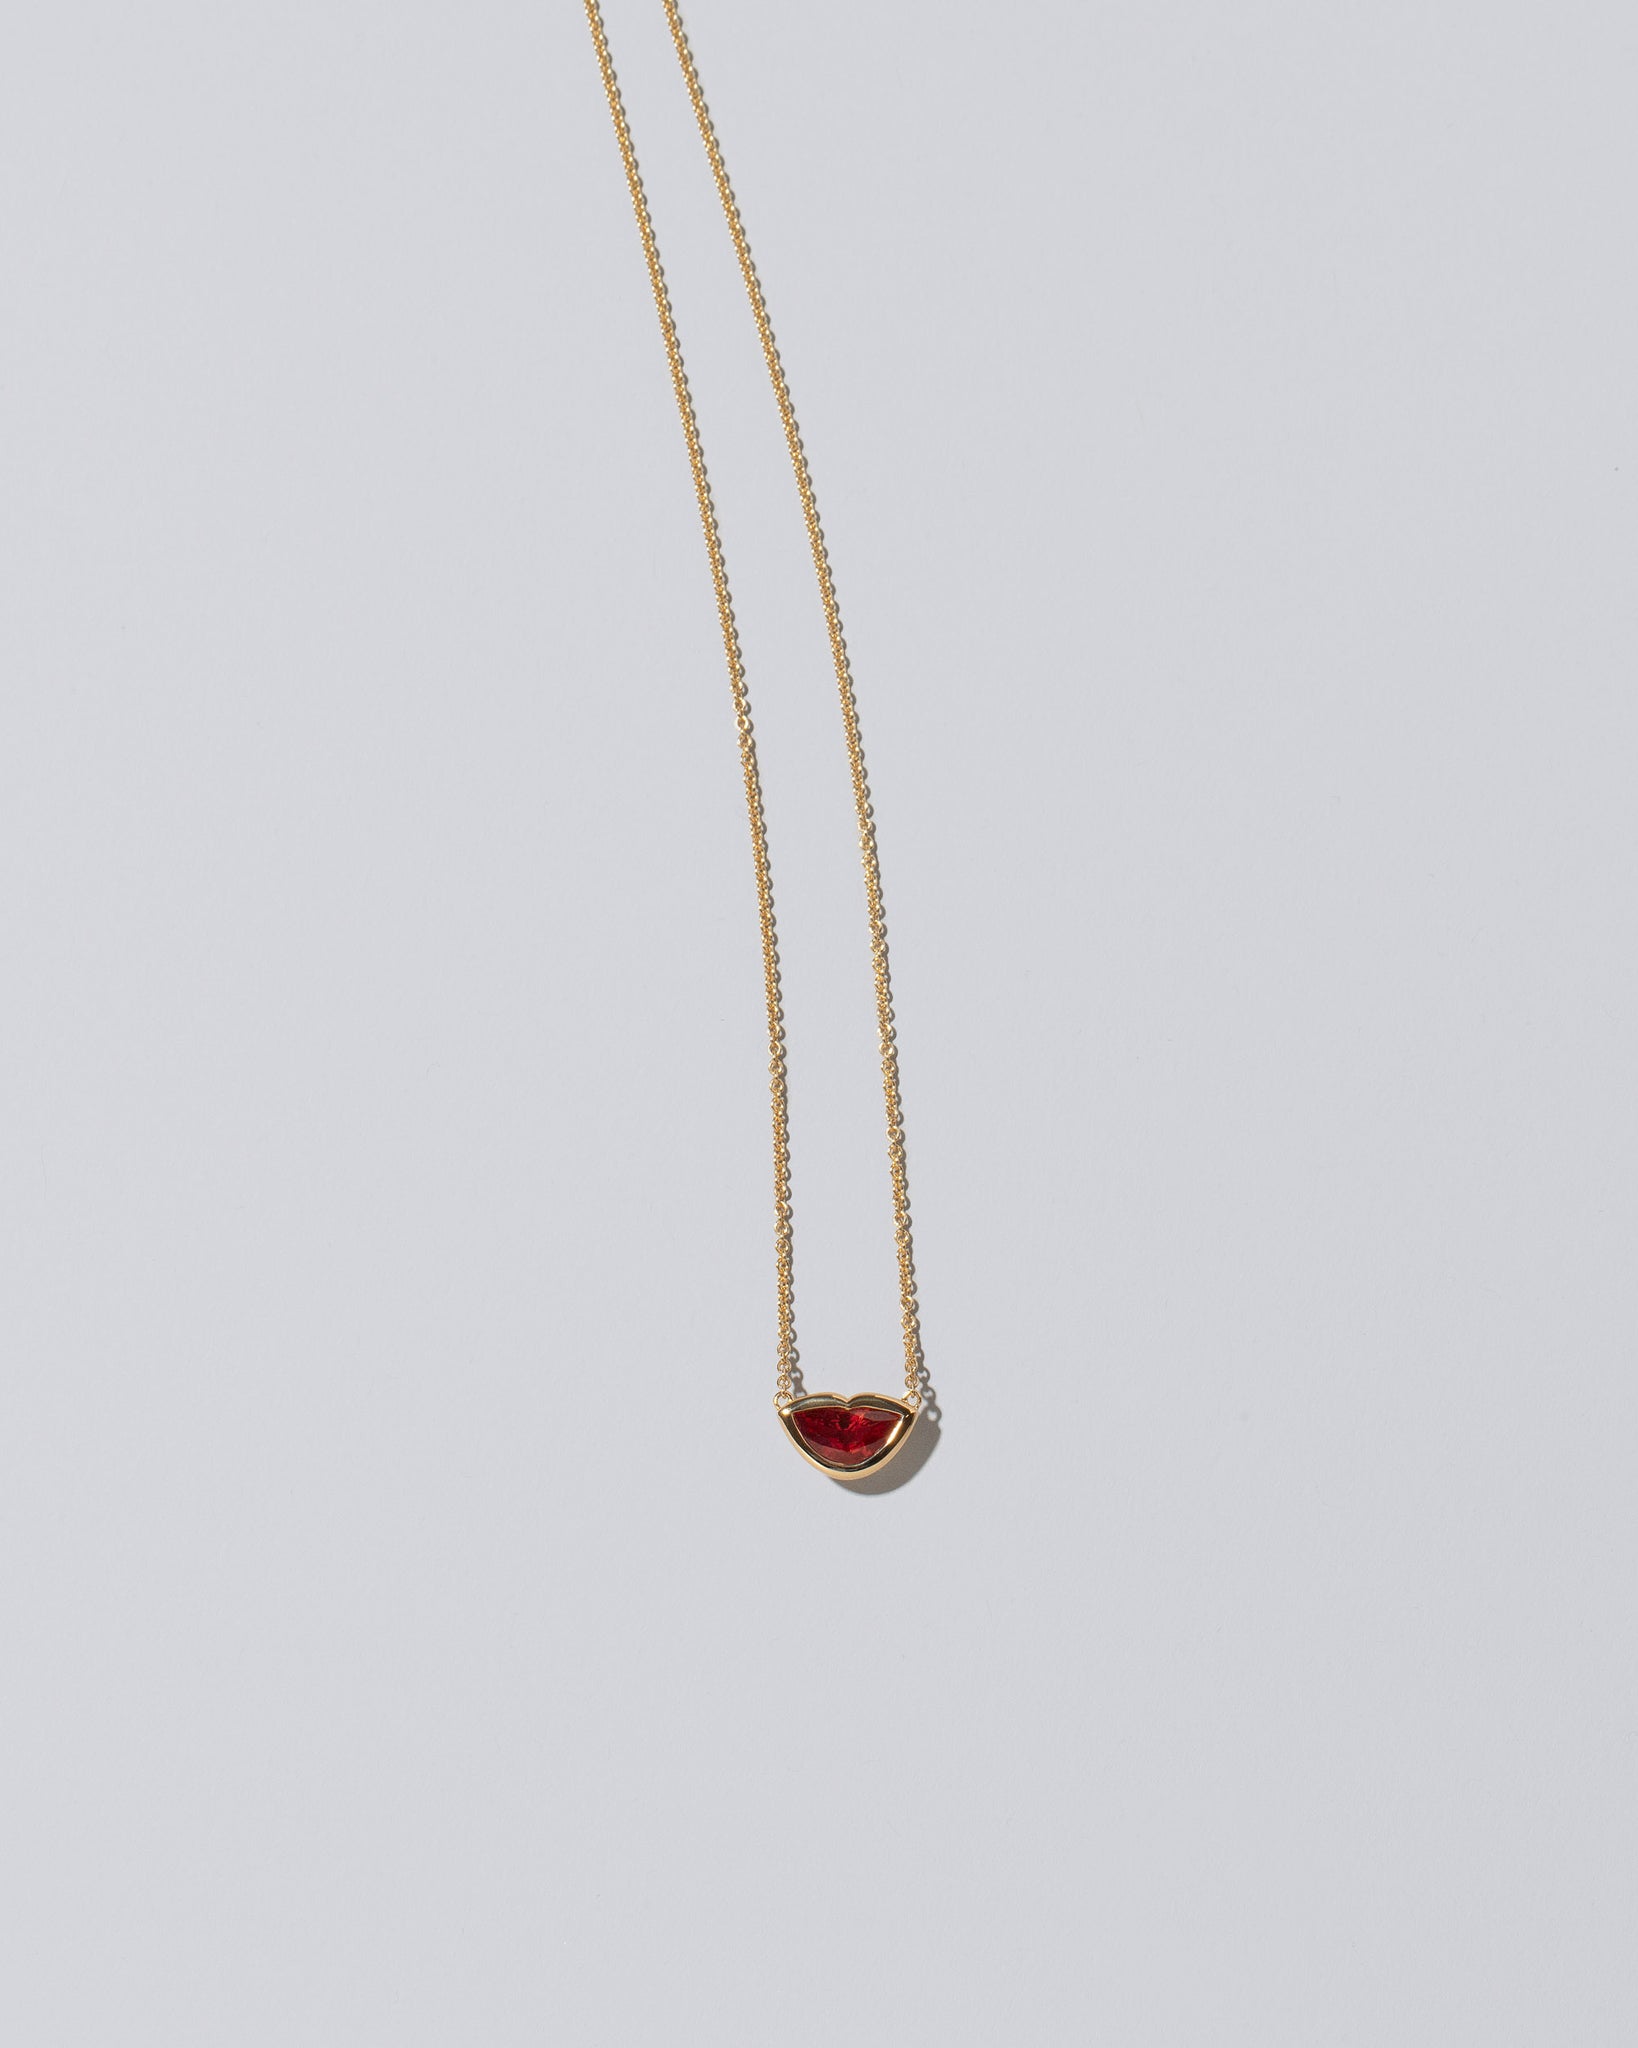 Red Spinel Lover's Kiss Necklace on light color background.